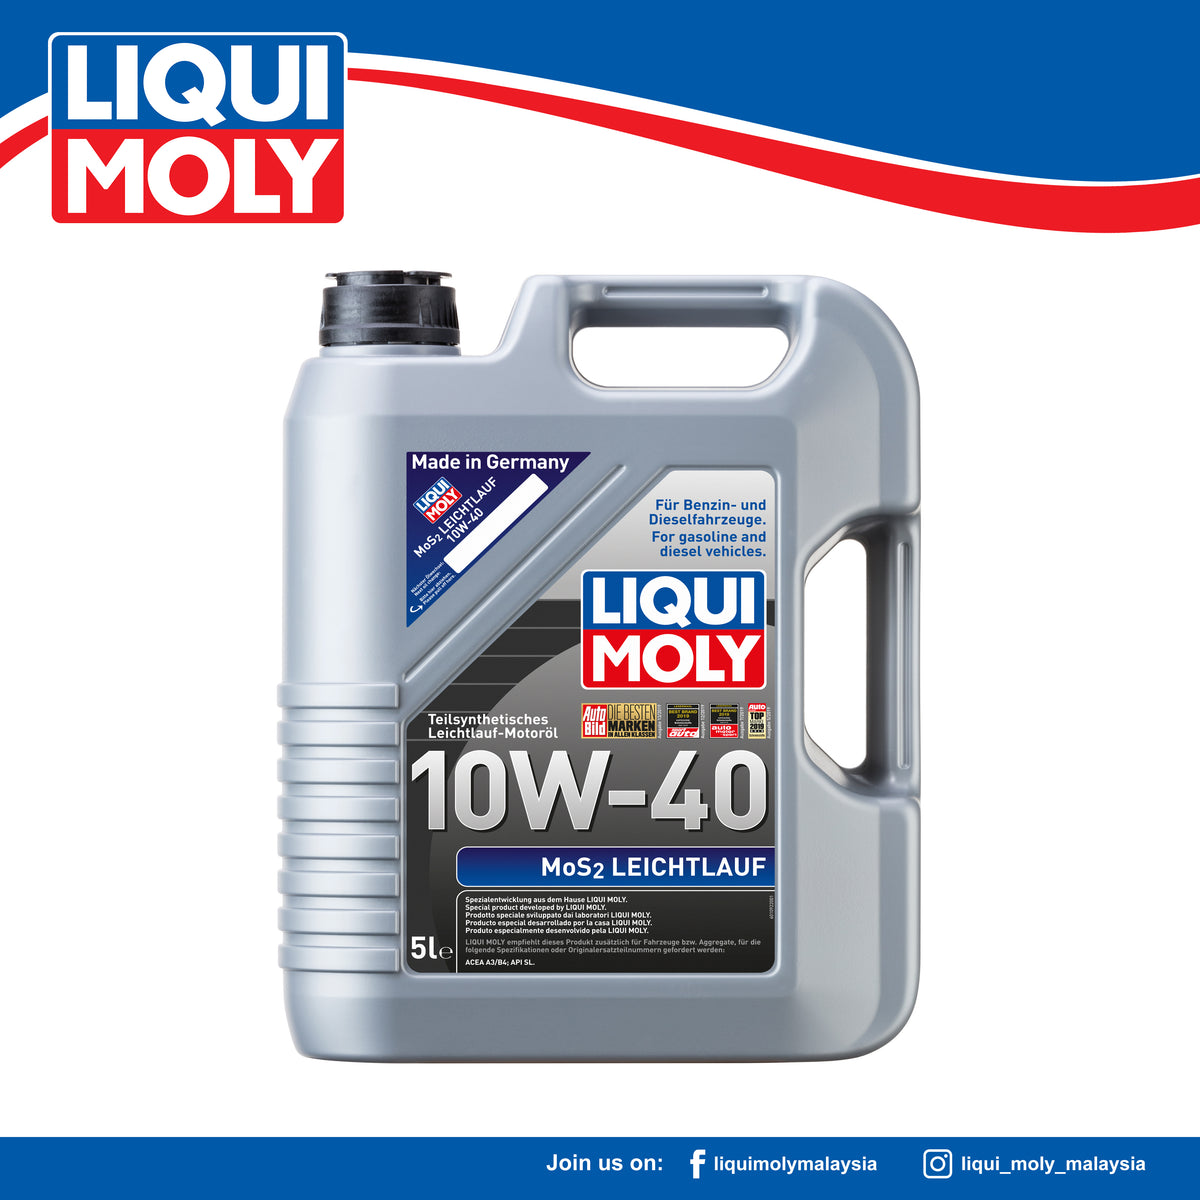 4 Facts you probably don't know about LIQUI MOLY MoS2. – Liqui Moly Malaysia